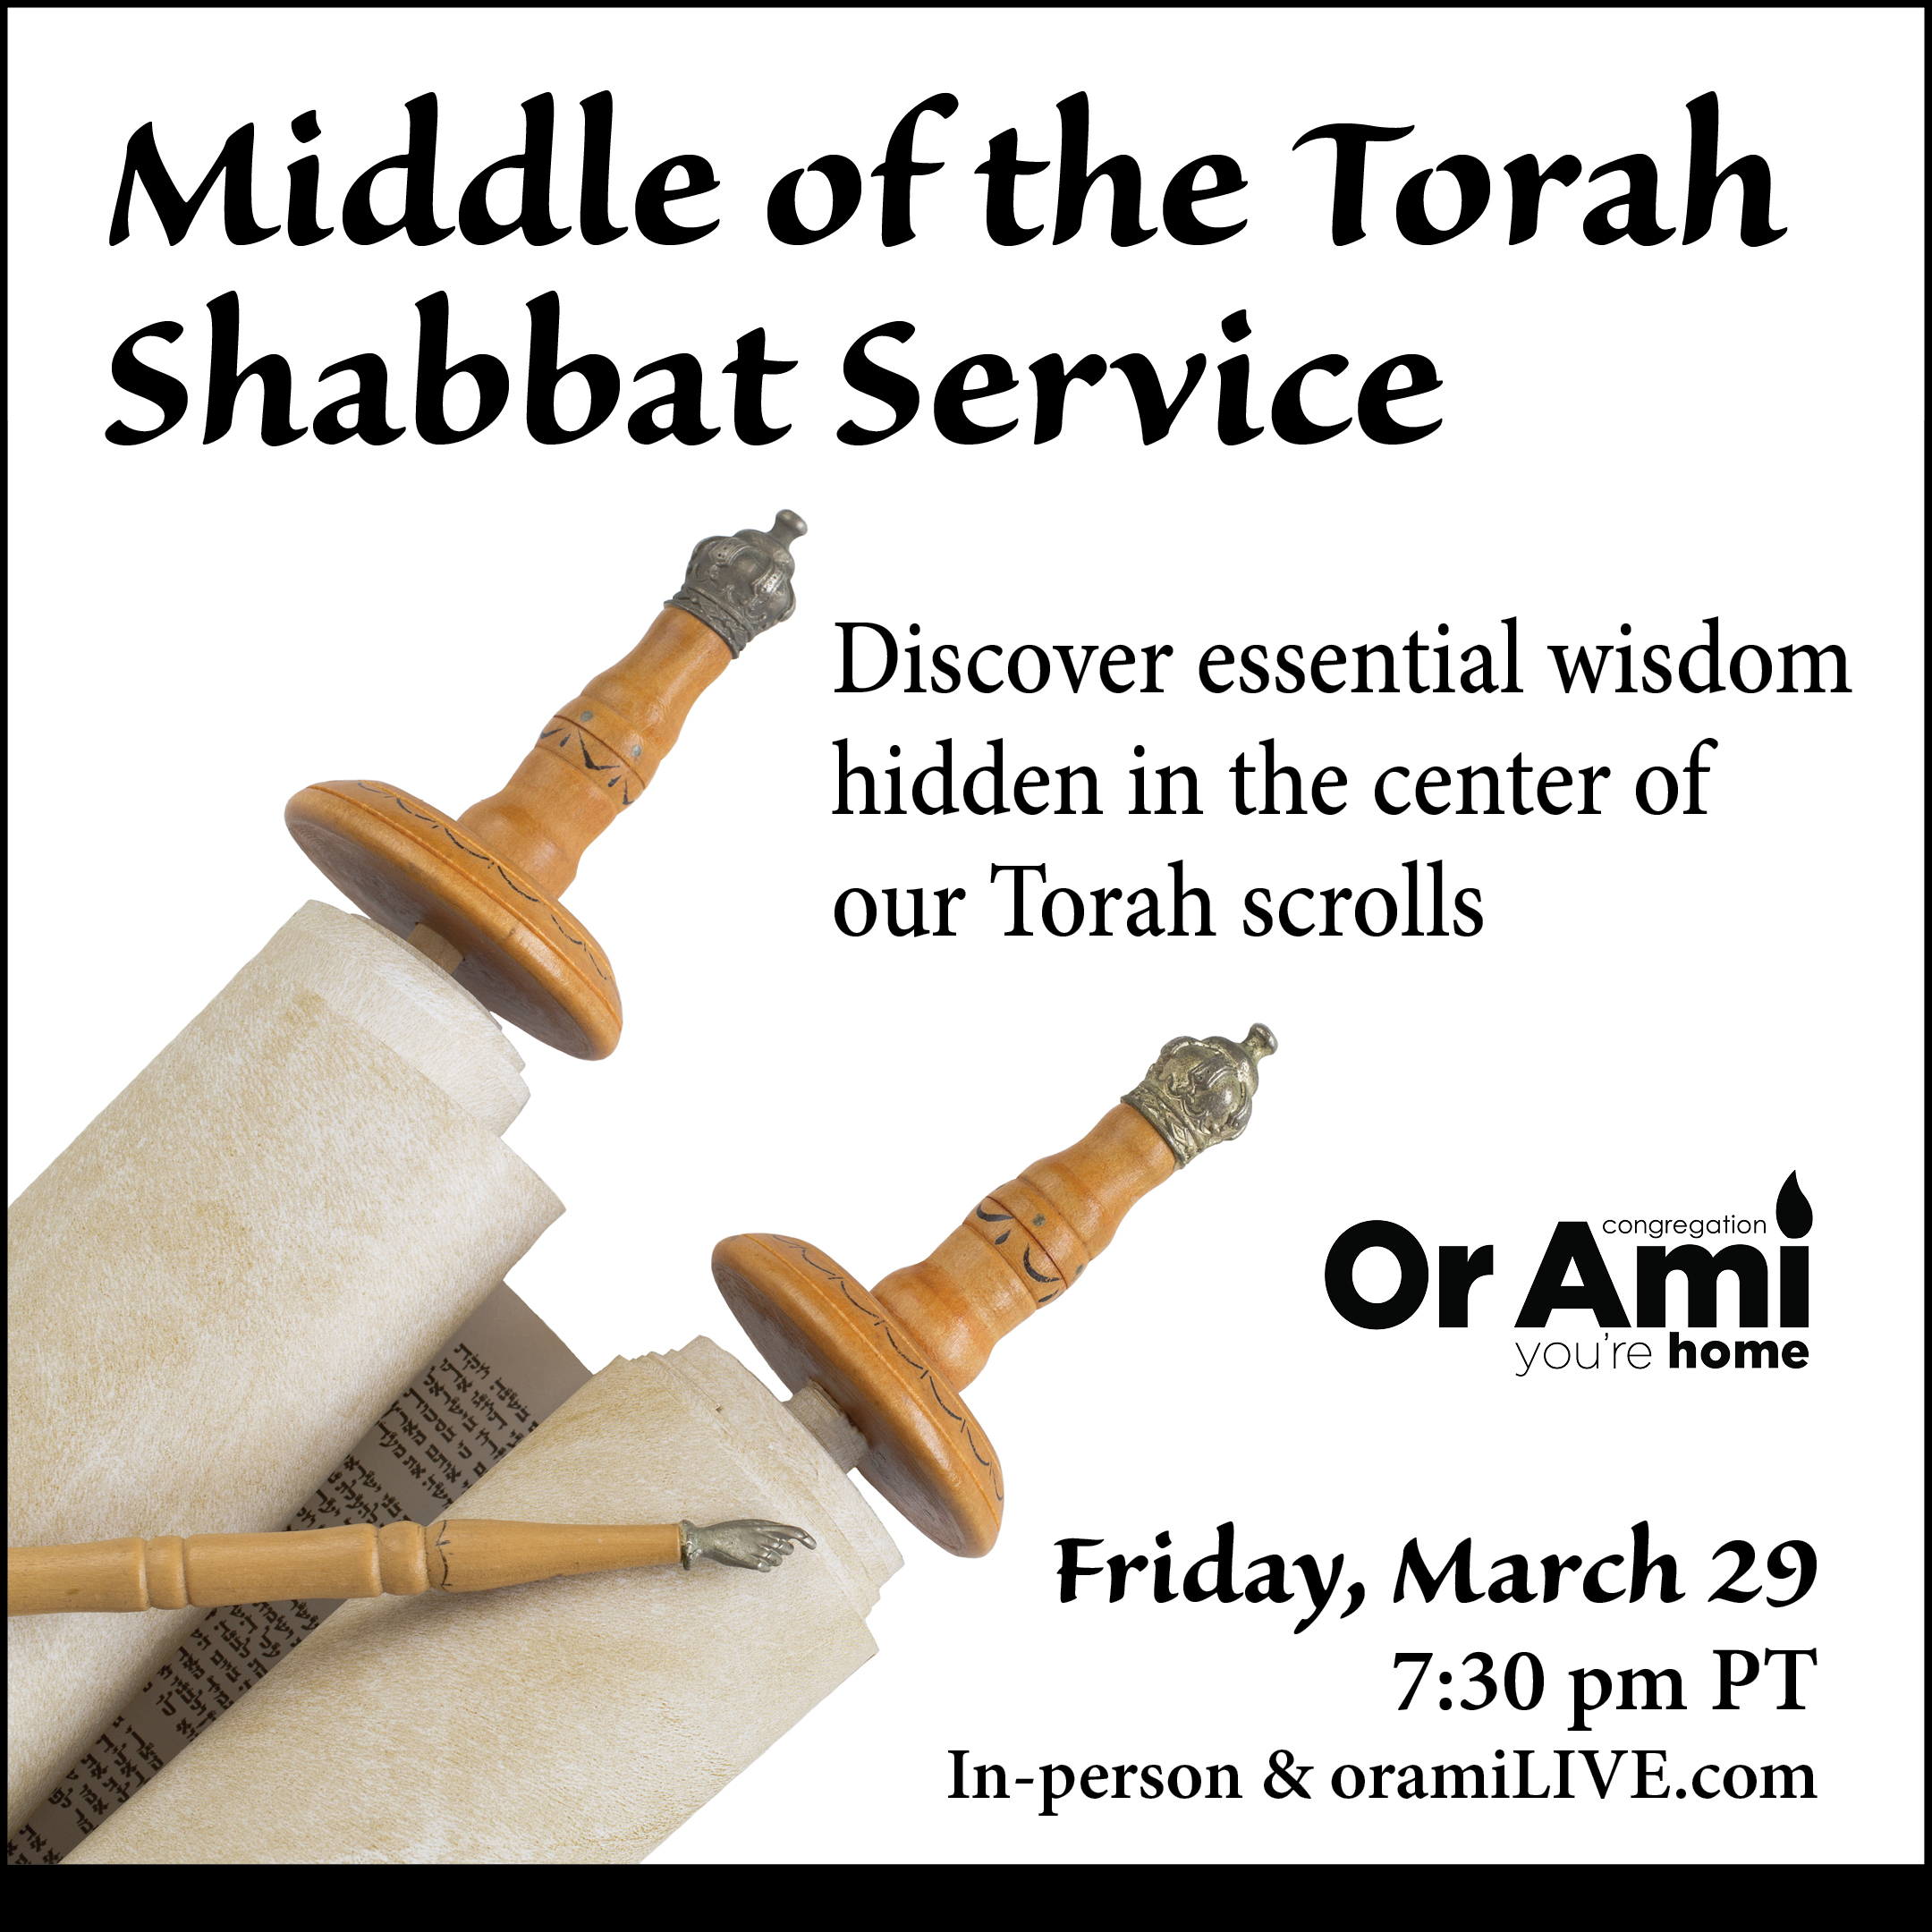 *Or Ami Middle of the Torah Shabbat